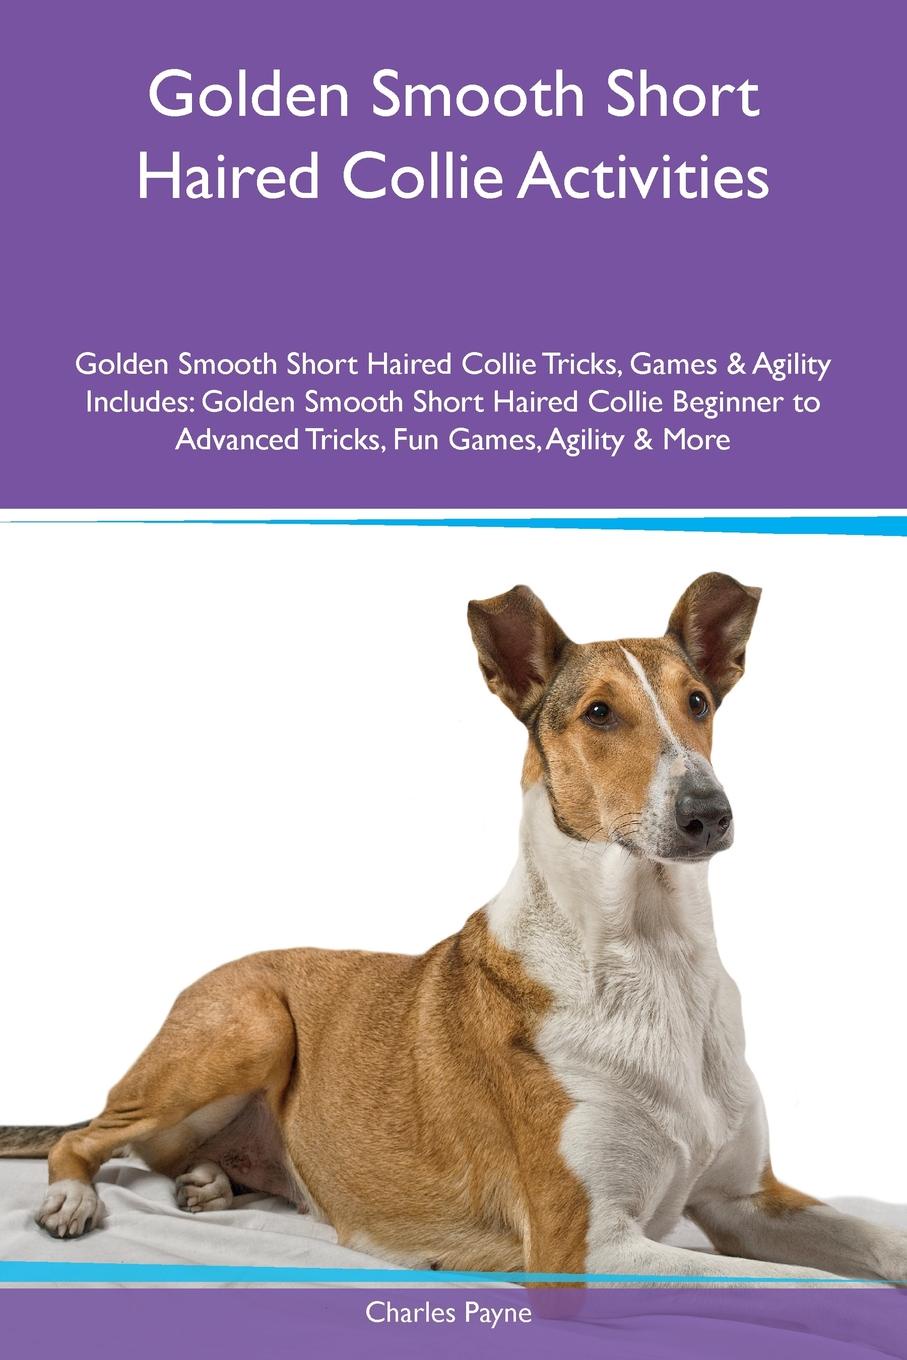 Golden Smooth Short Haired Collie Activities Golden Smooth Short Haired Collie Tricks, Games & Agility Includes. Golden Smooth Short Haired Collie Beginner to Advanced Tricks, Fun Games, Agility & More